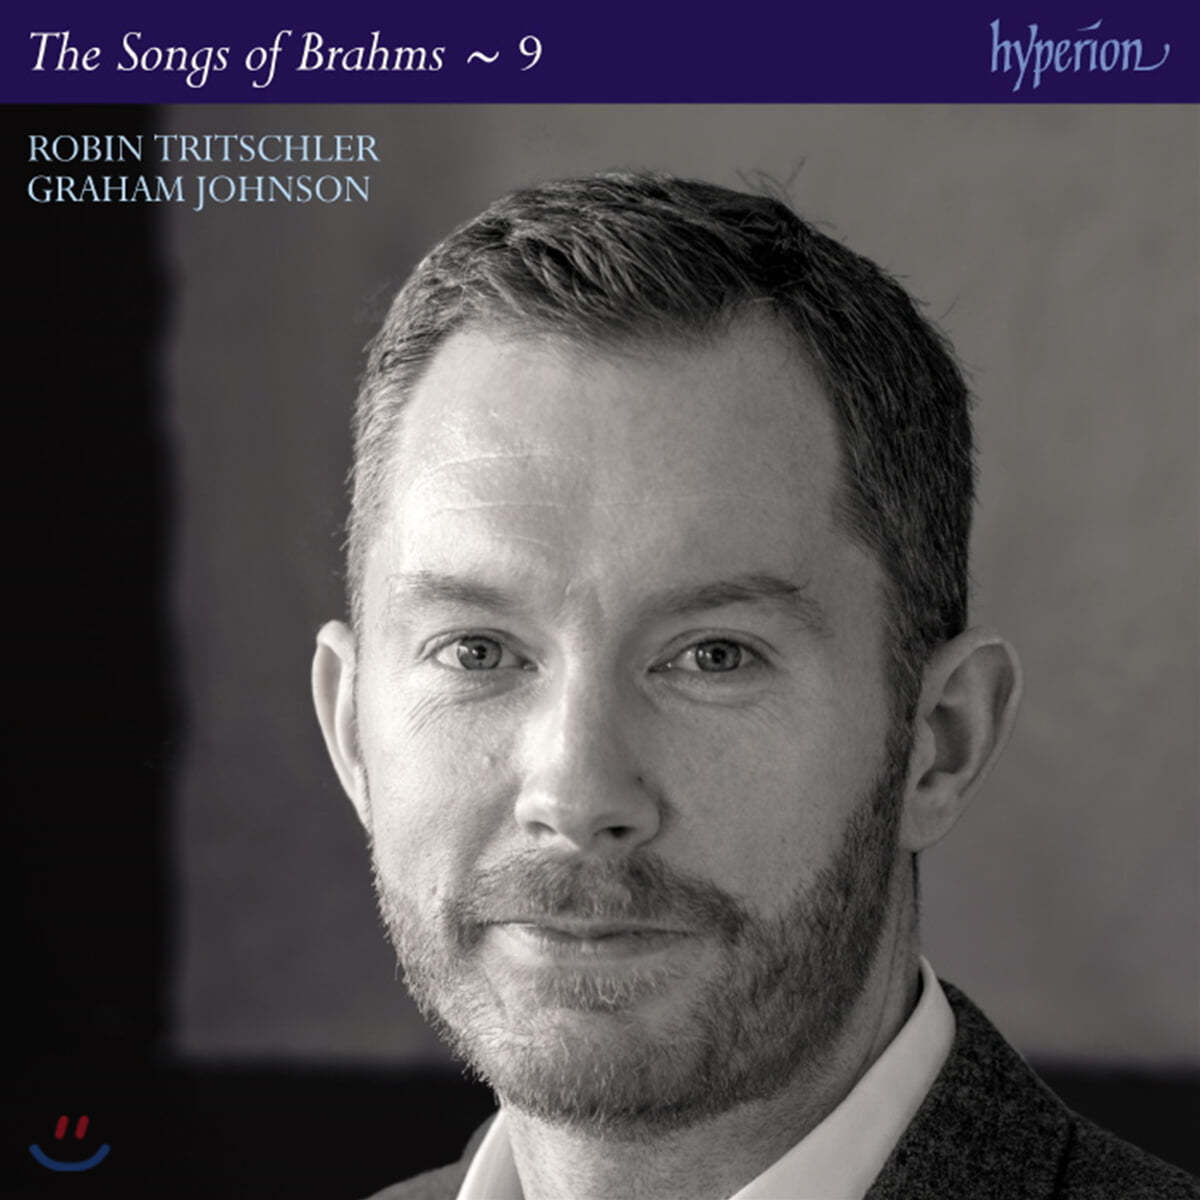 Robin Tritschler 브람스: 가곡 전곡 9집 (Brahms: The Complete Songs, Vol. 9)